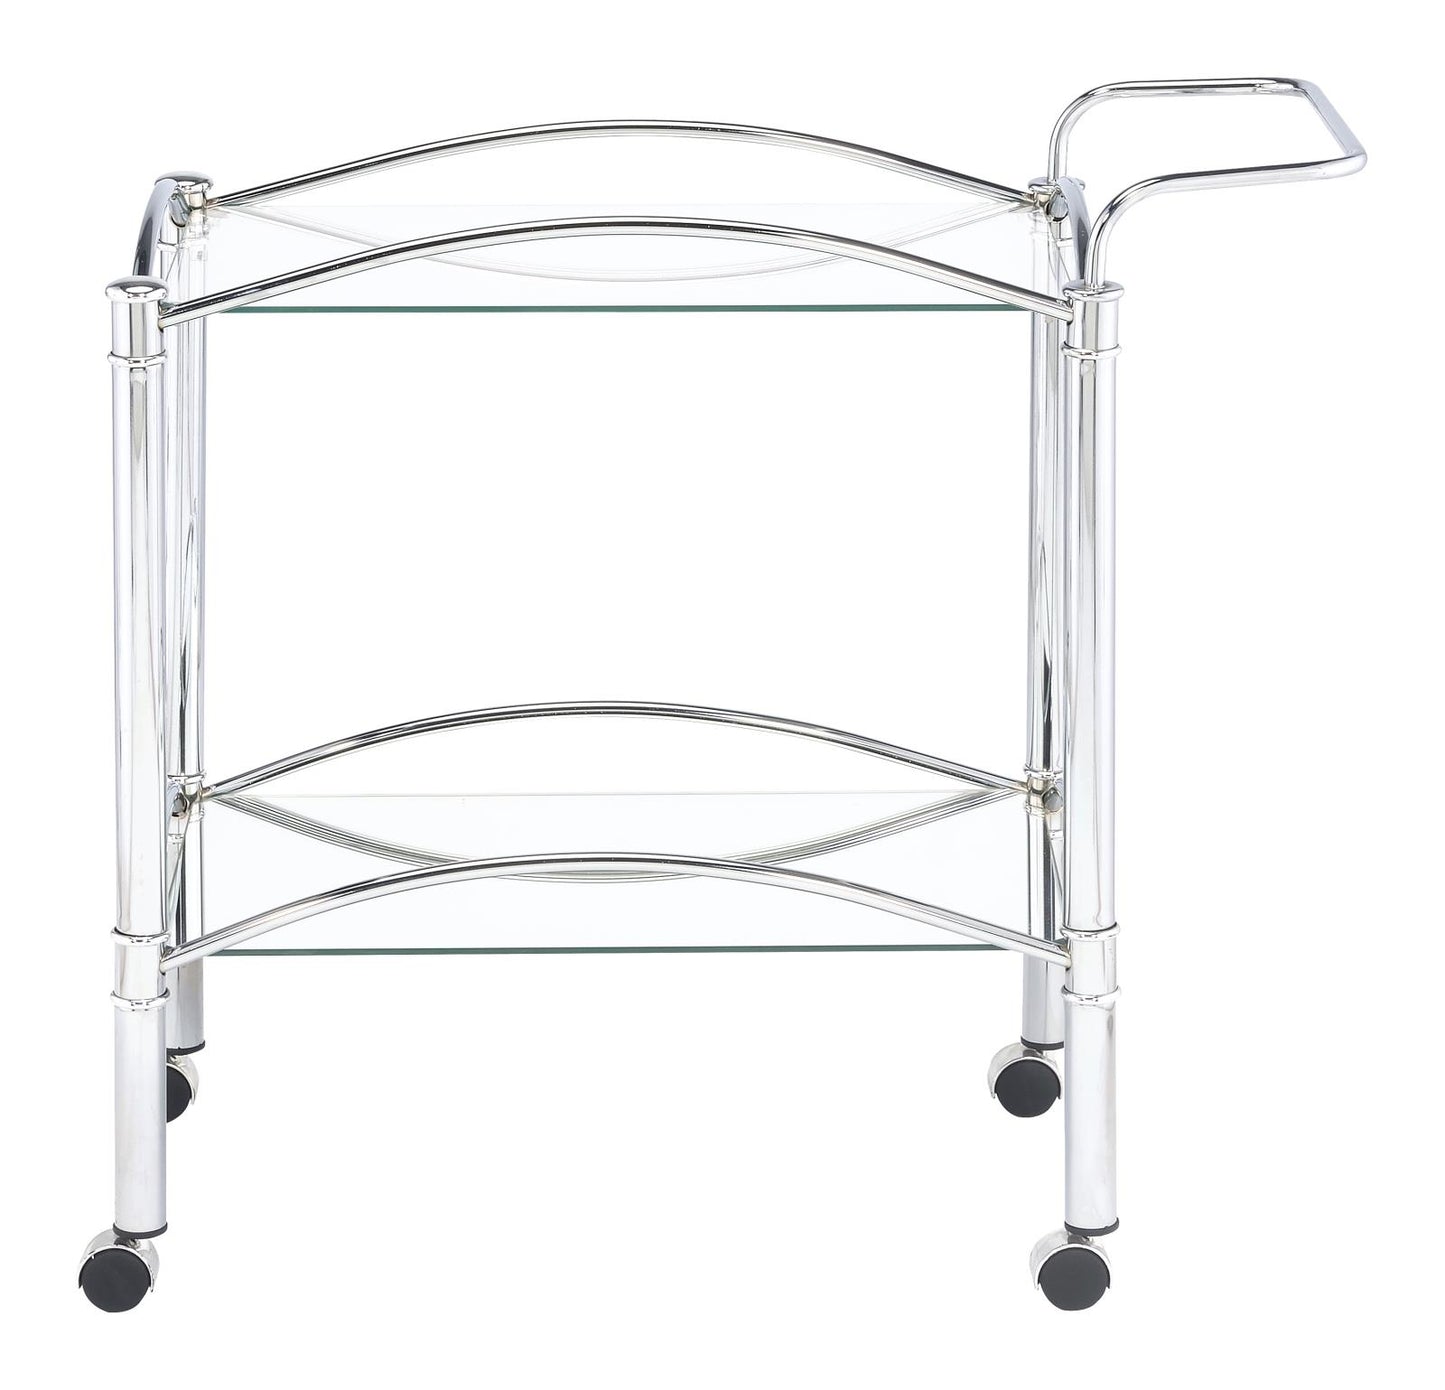 Shadix 2-tier Serving Cart with Glass Top Chrome and Clear